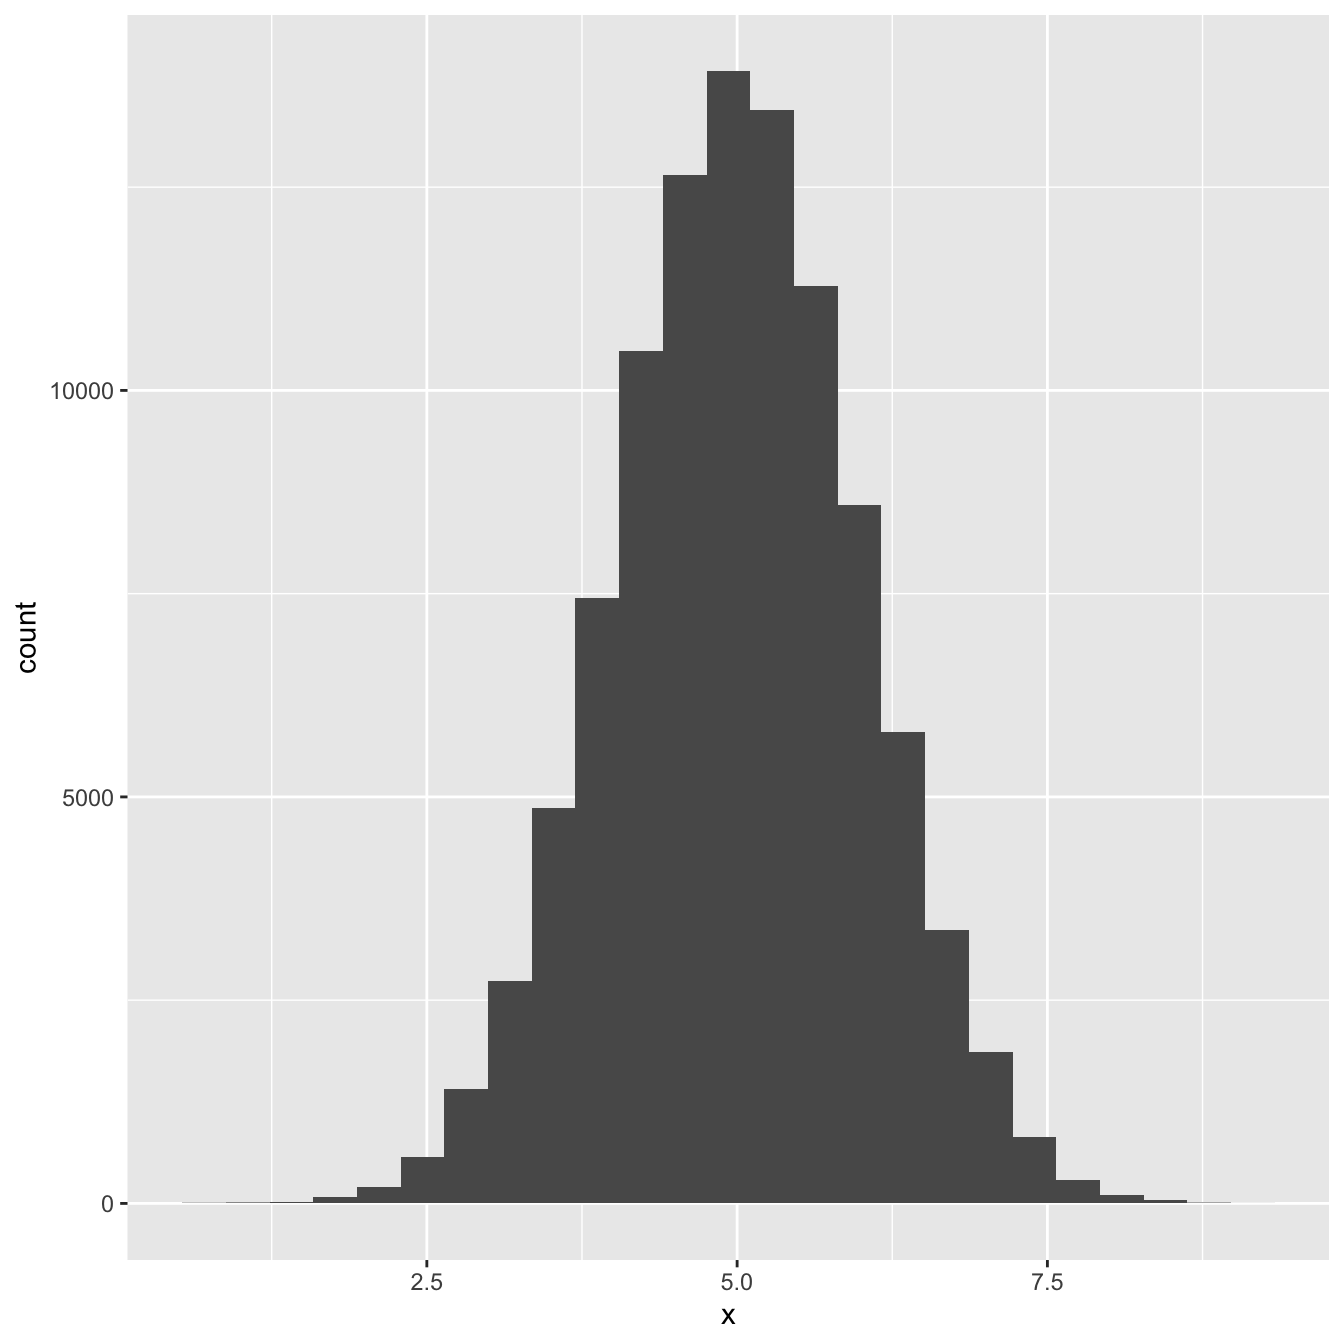 Distribution of a large sample of normally distributed variable